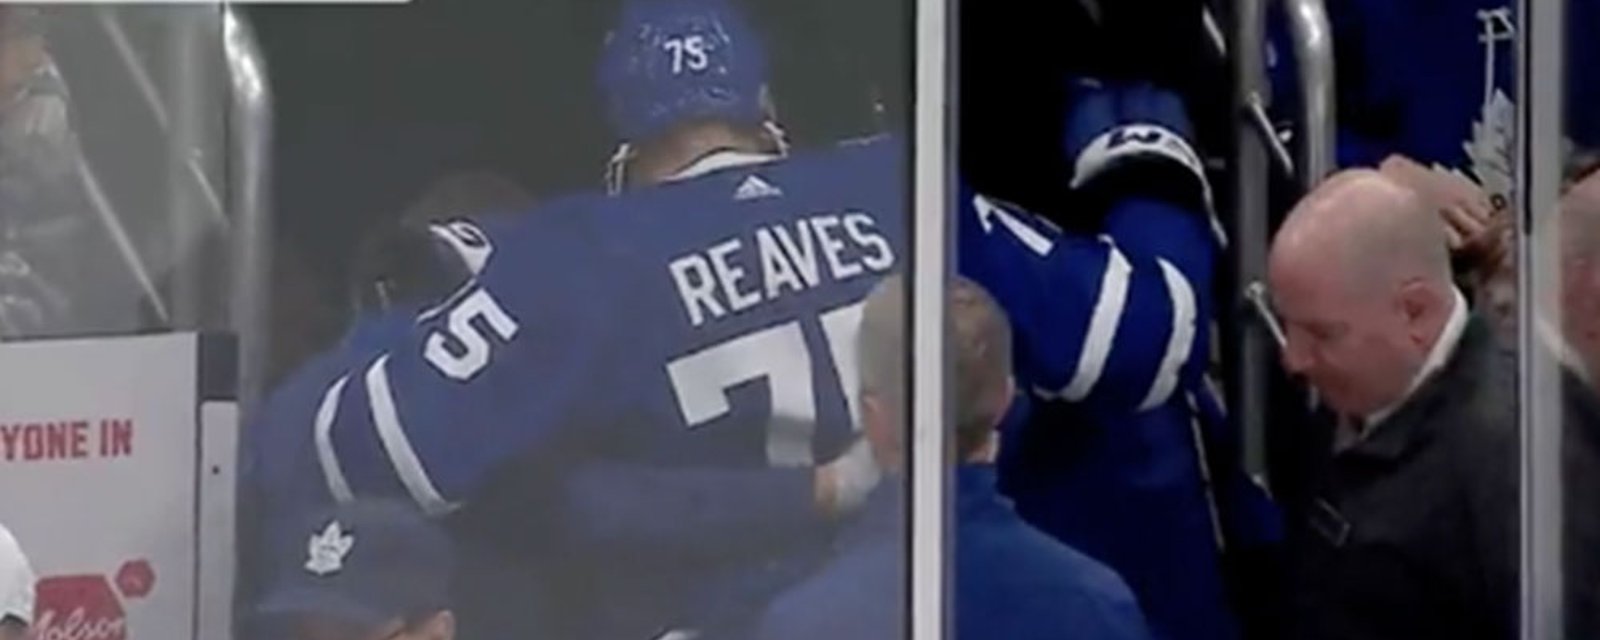 Reaves injures himself by running into the boards then falls down the stairs while leaving the rink